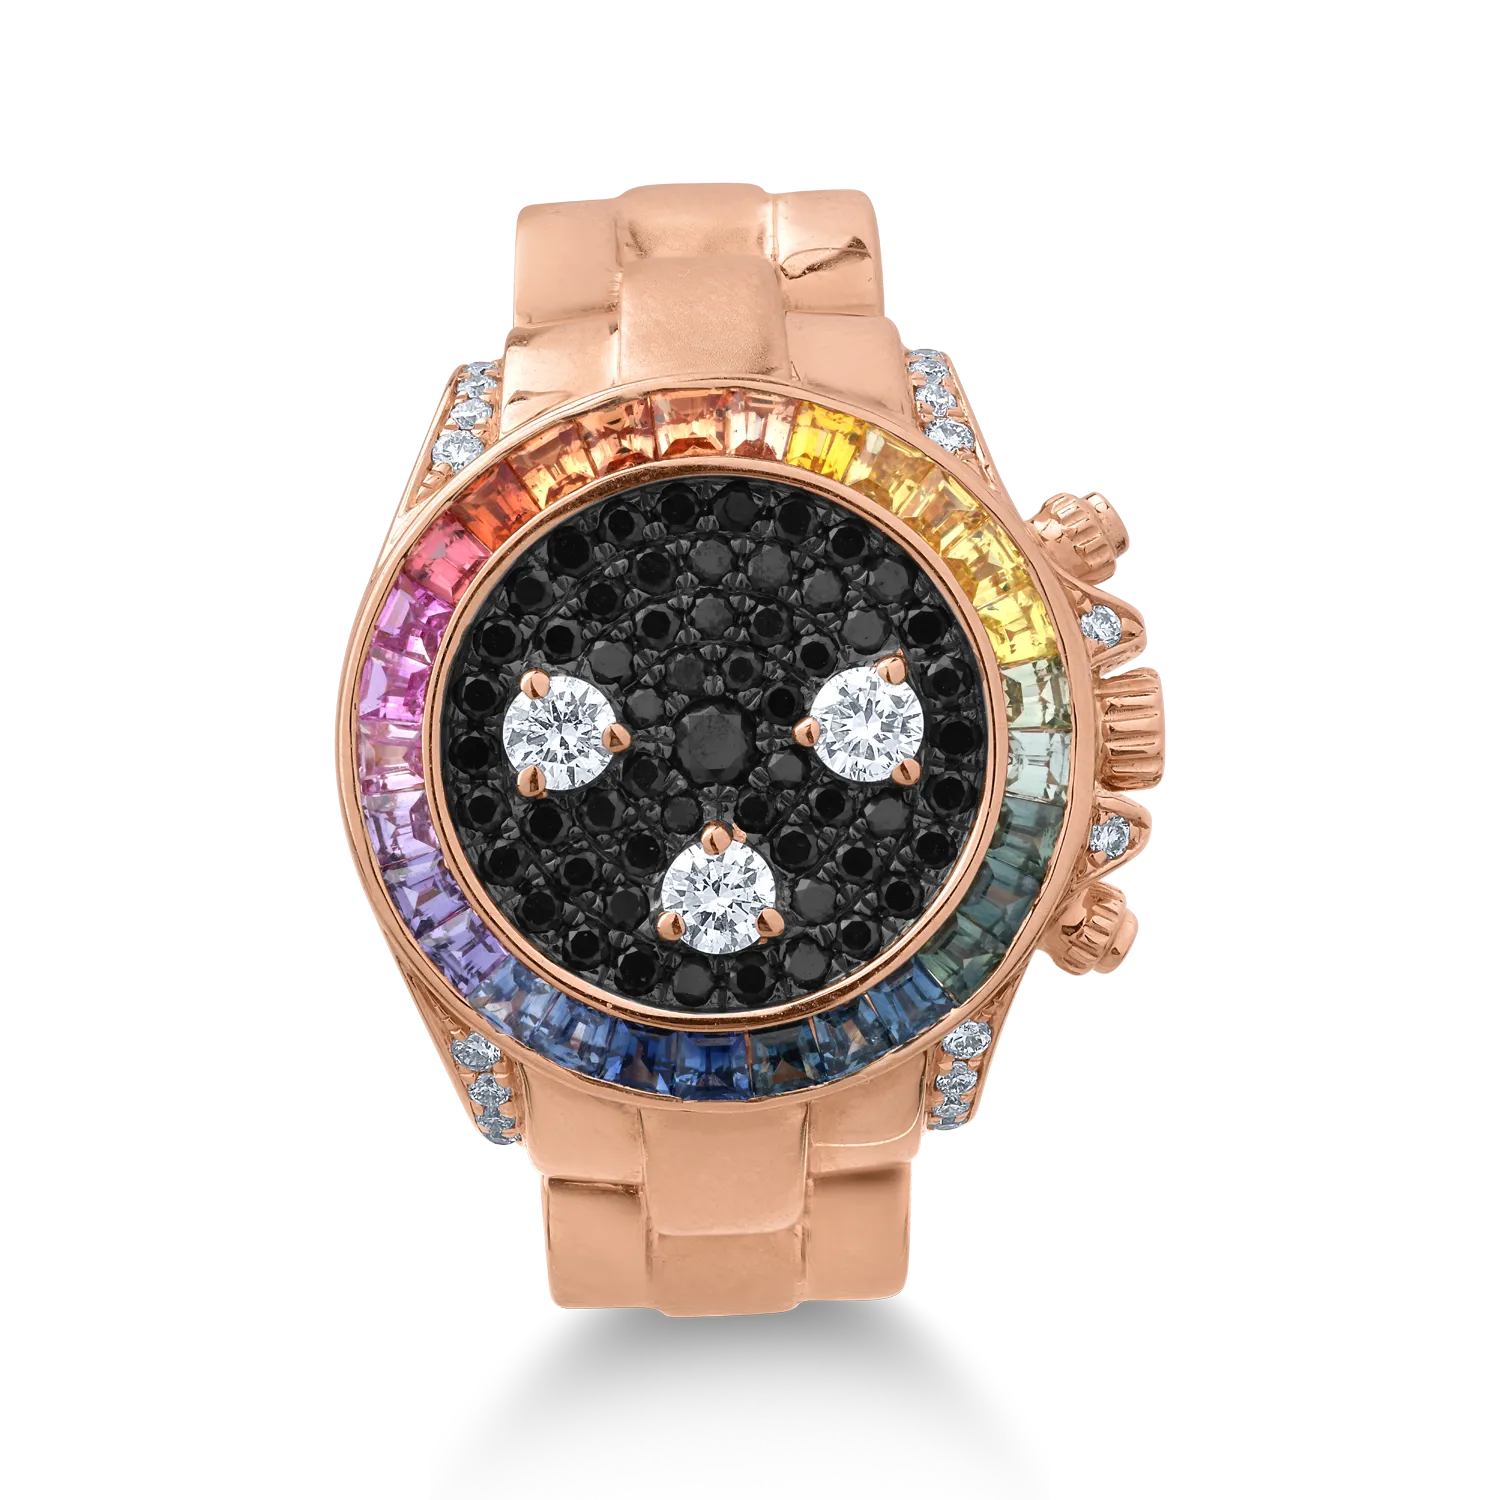 18K rose gold ring with 0.71ct multicolored sapphires and 0.5ct diamonds